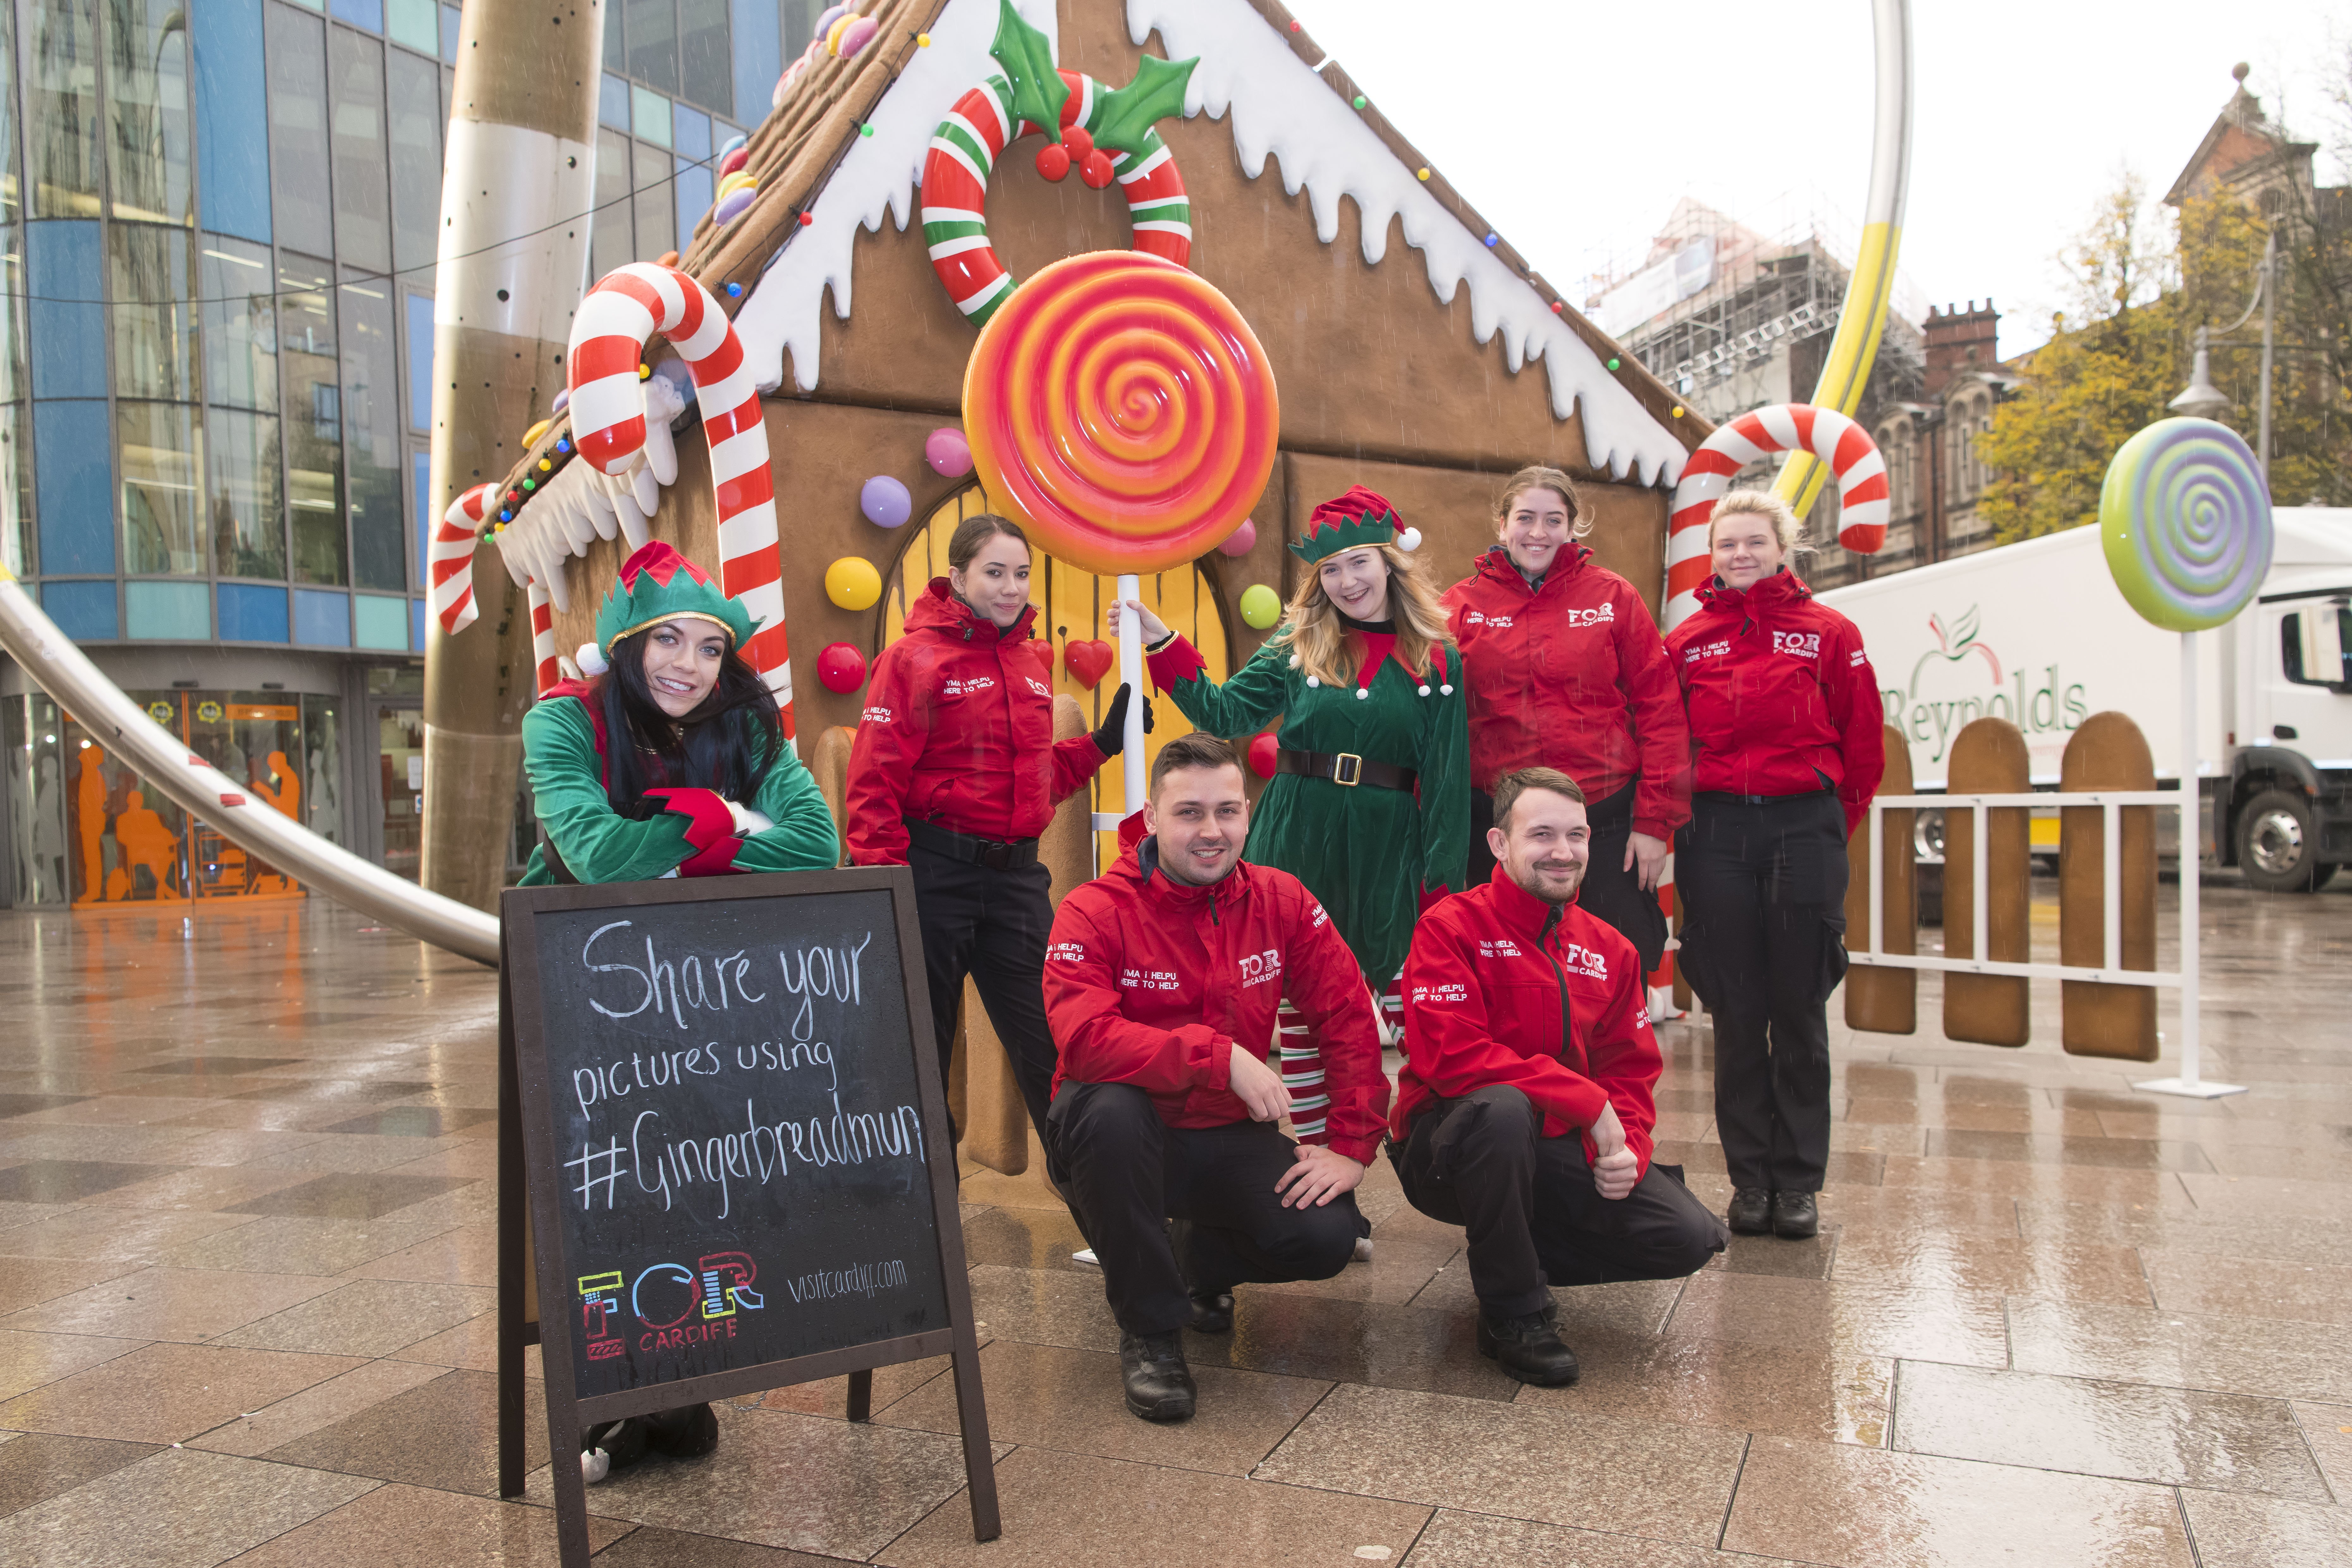 FOR Cardiff ambassadors with the Christmas Elves